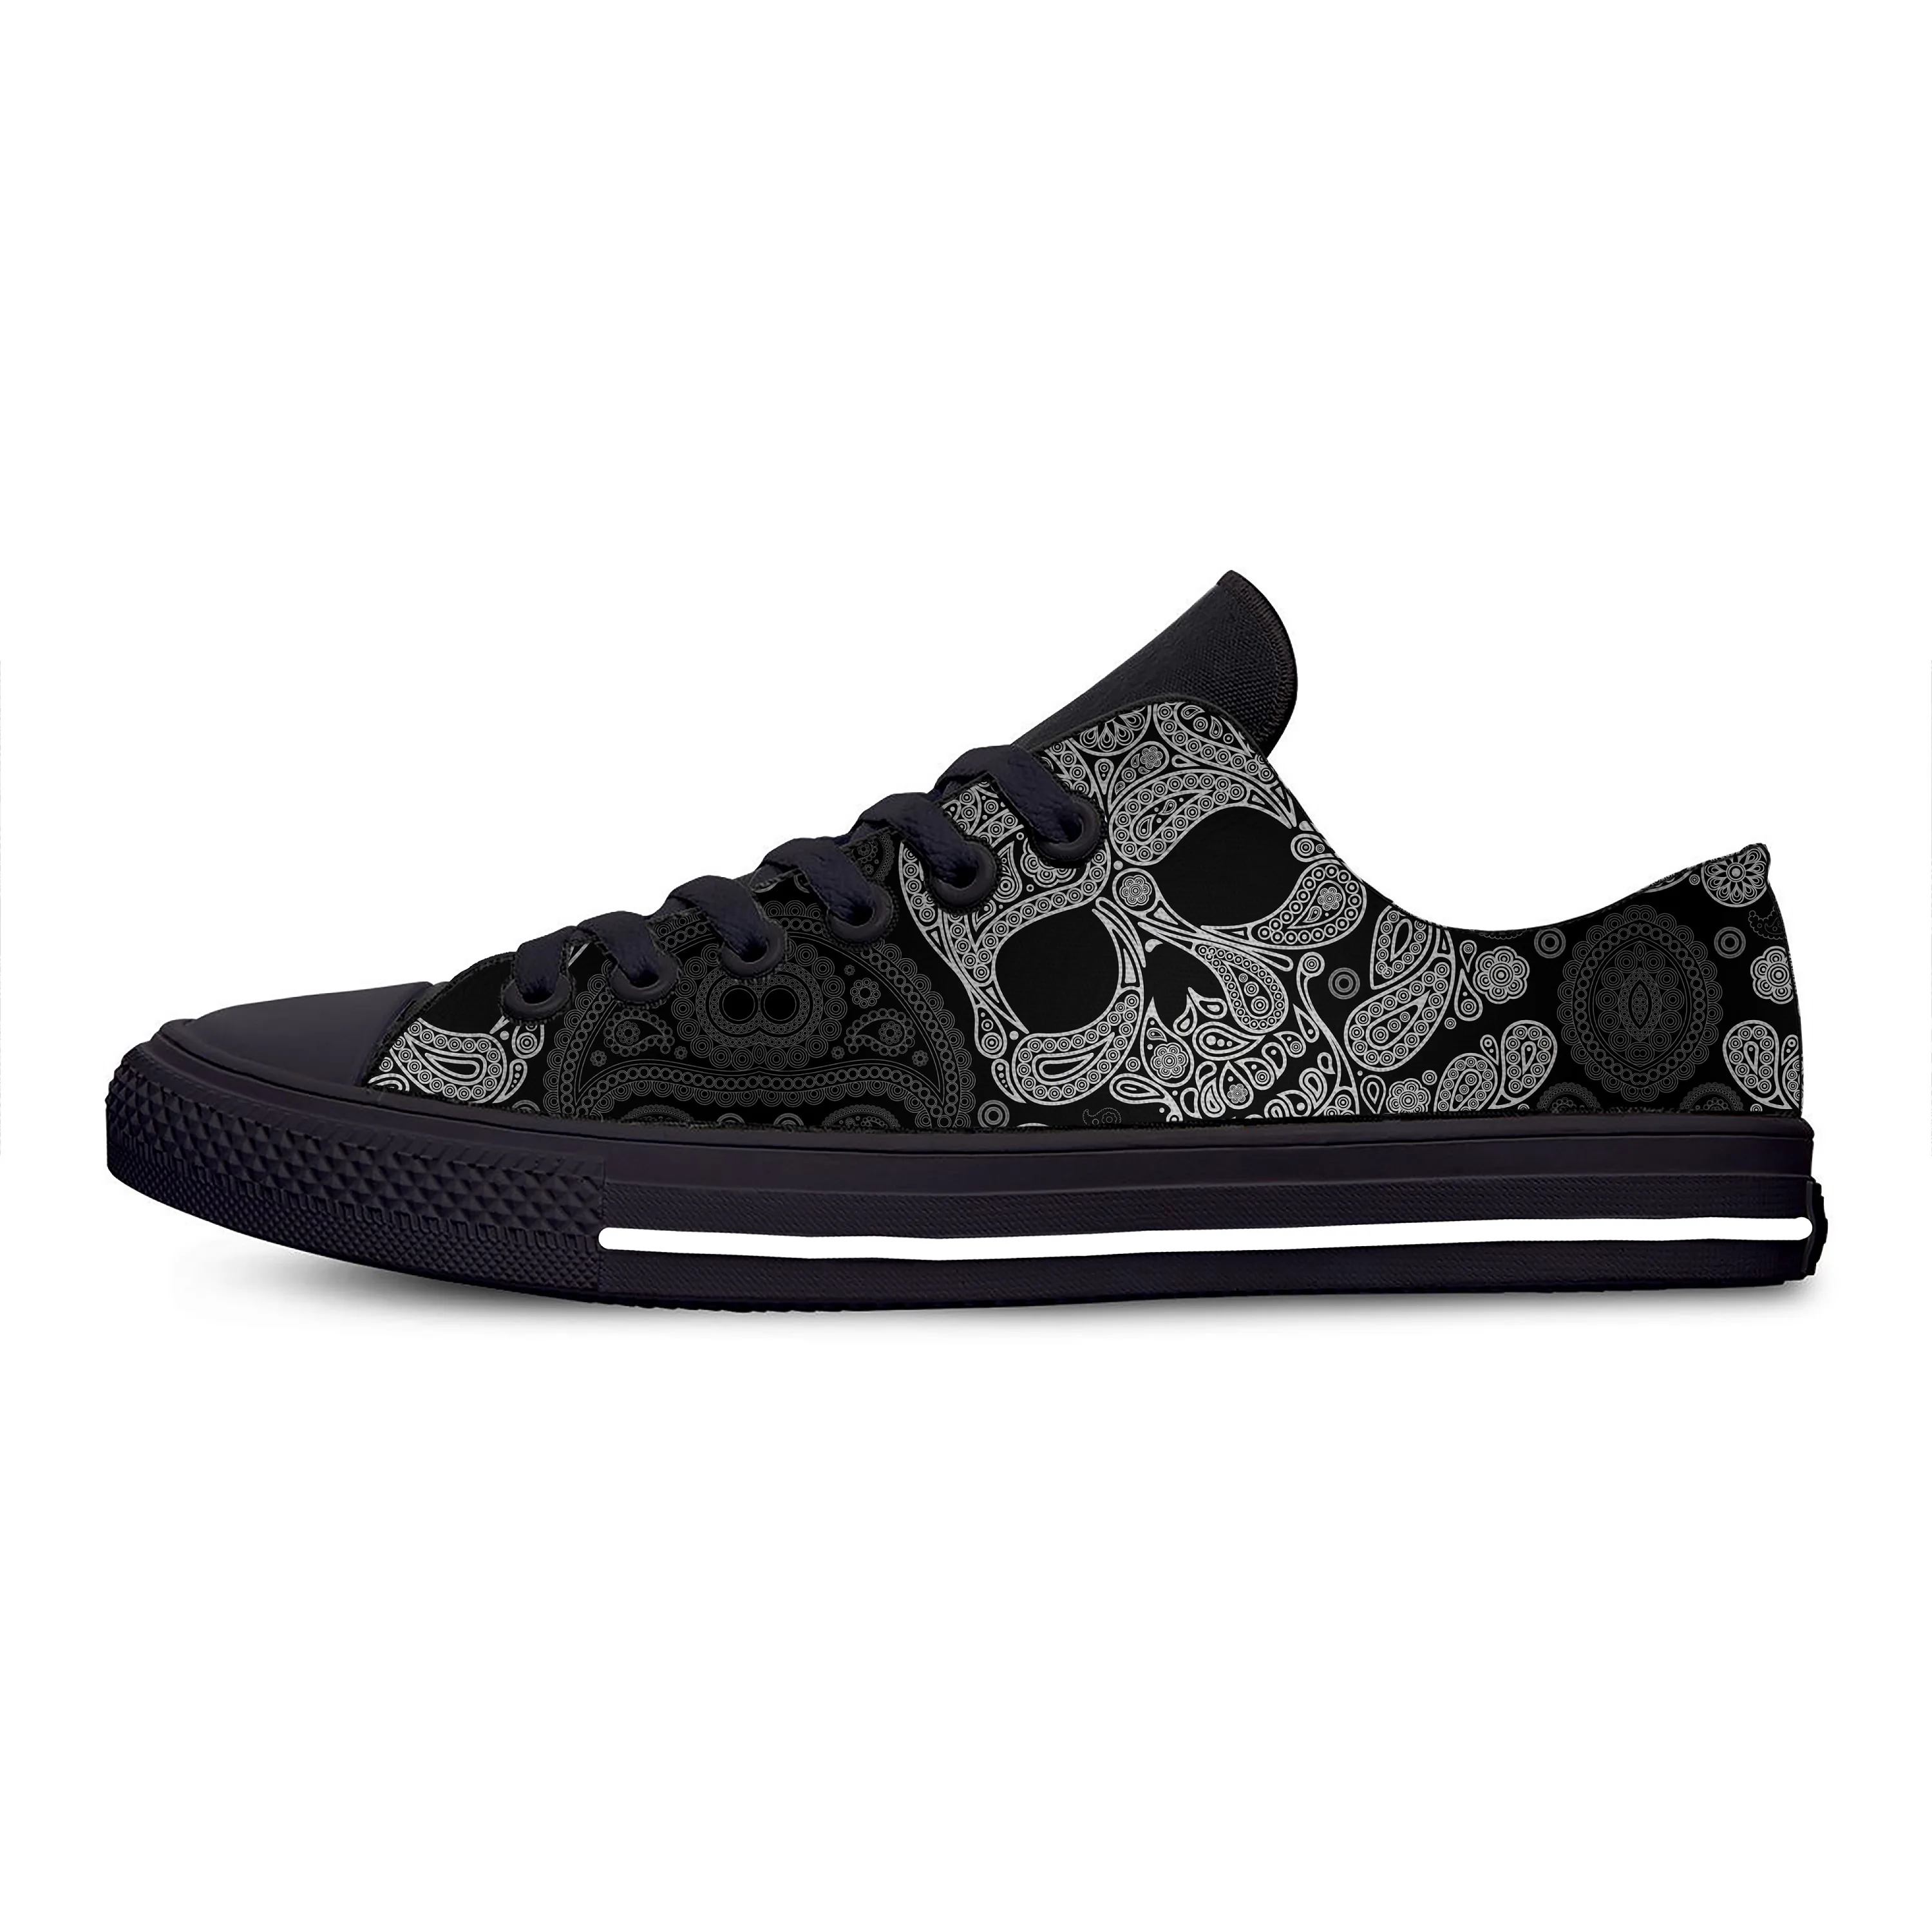 

Hot SKull Skeleton PAisley Horror Halloween Aesthetic Board Shoes Casual Shoes Low Top Lightweight Breathable Men Women Sneakers